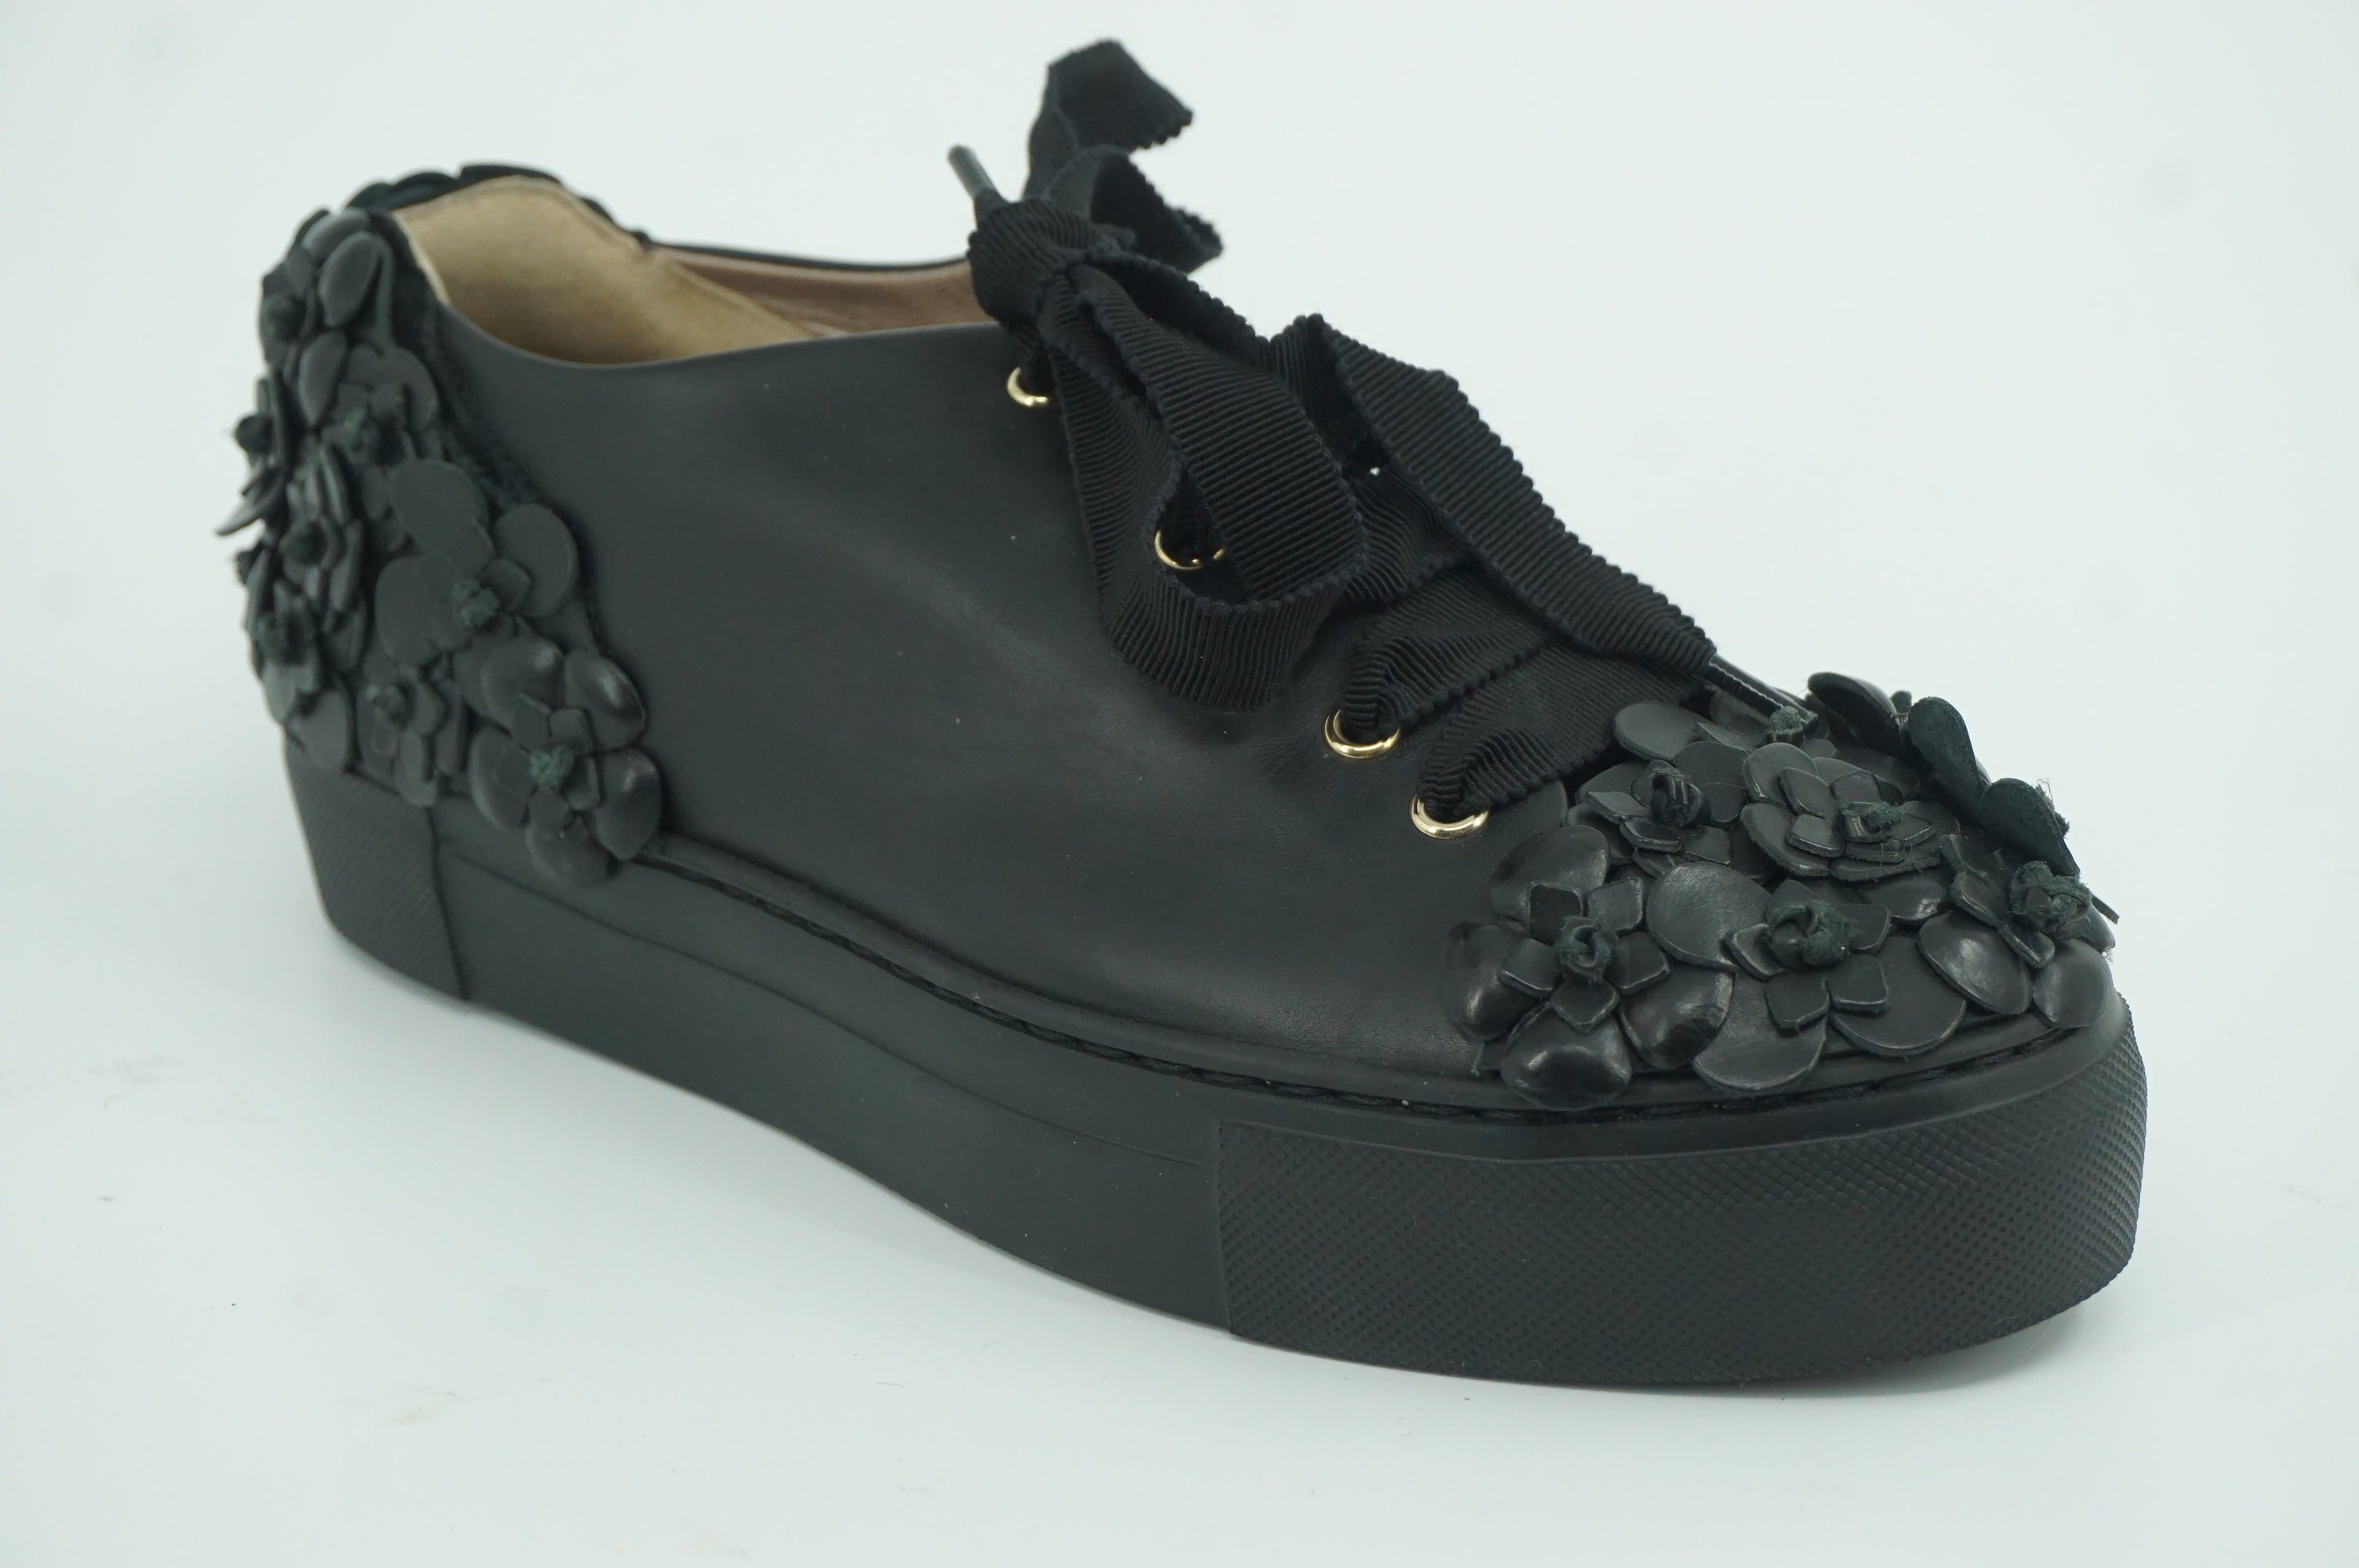 AGL Low Top Sneaker Black Leather Size 7 Womens Floral